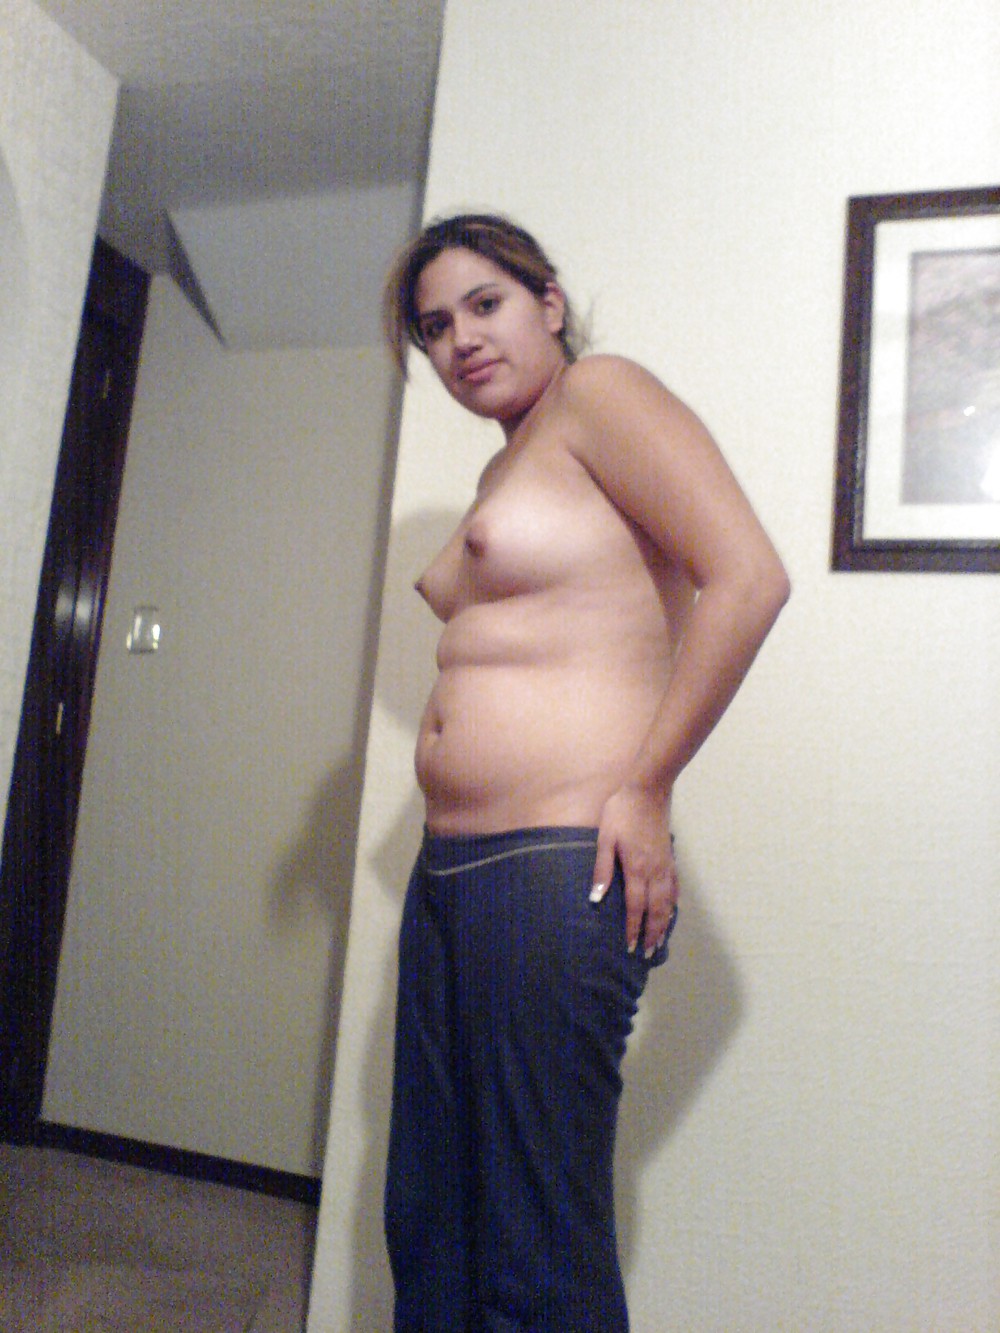 Some of my old pics. I was younger, but still a big ass bbw! #17709383